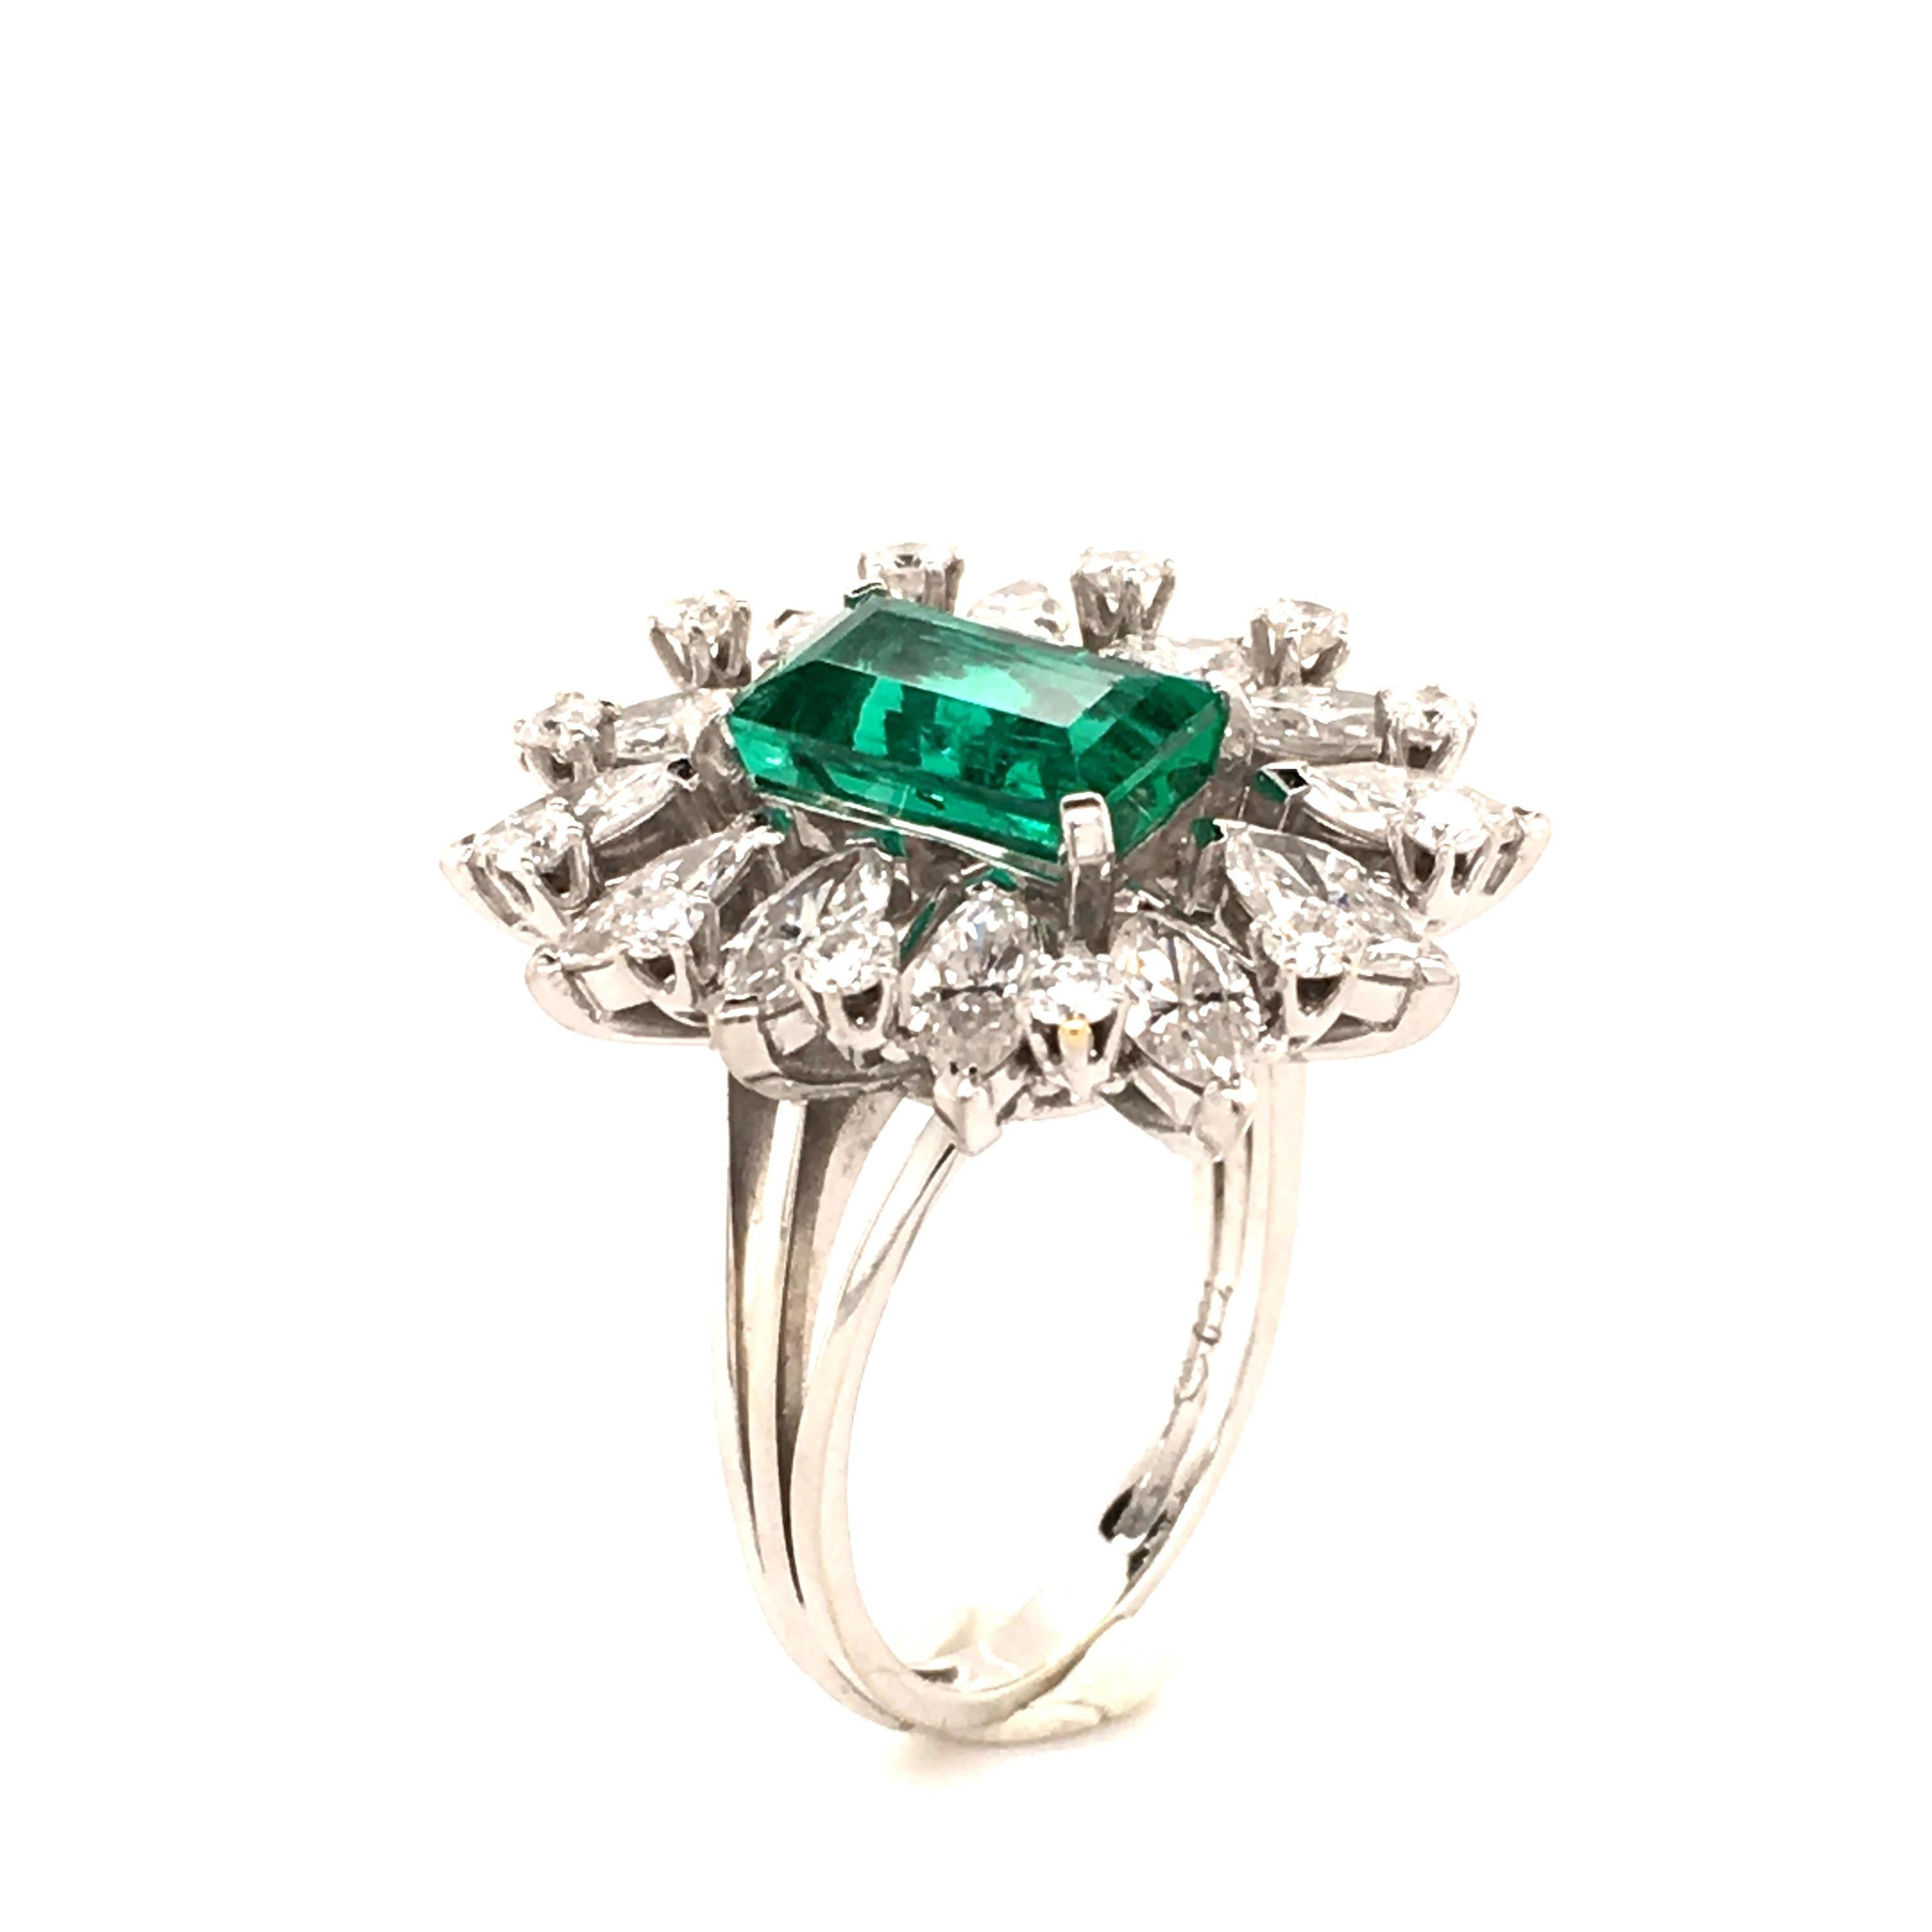 Octagon Cut 2.25 Carat Colombian Emerald and Diamond Ring in 18 Karat White Gold